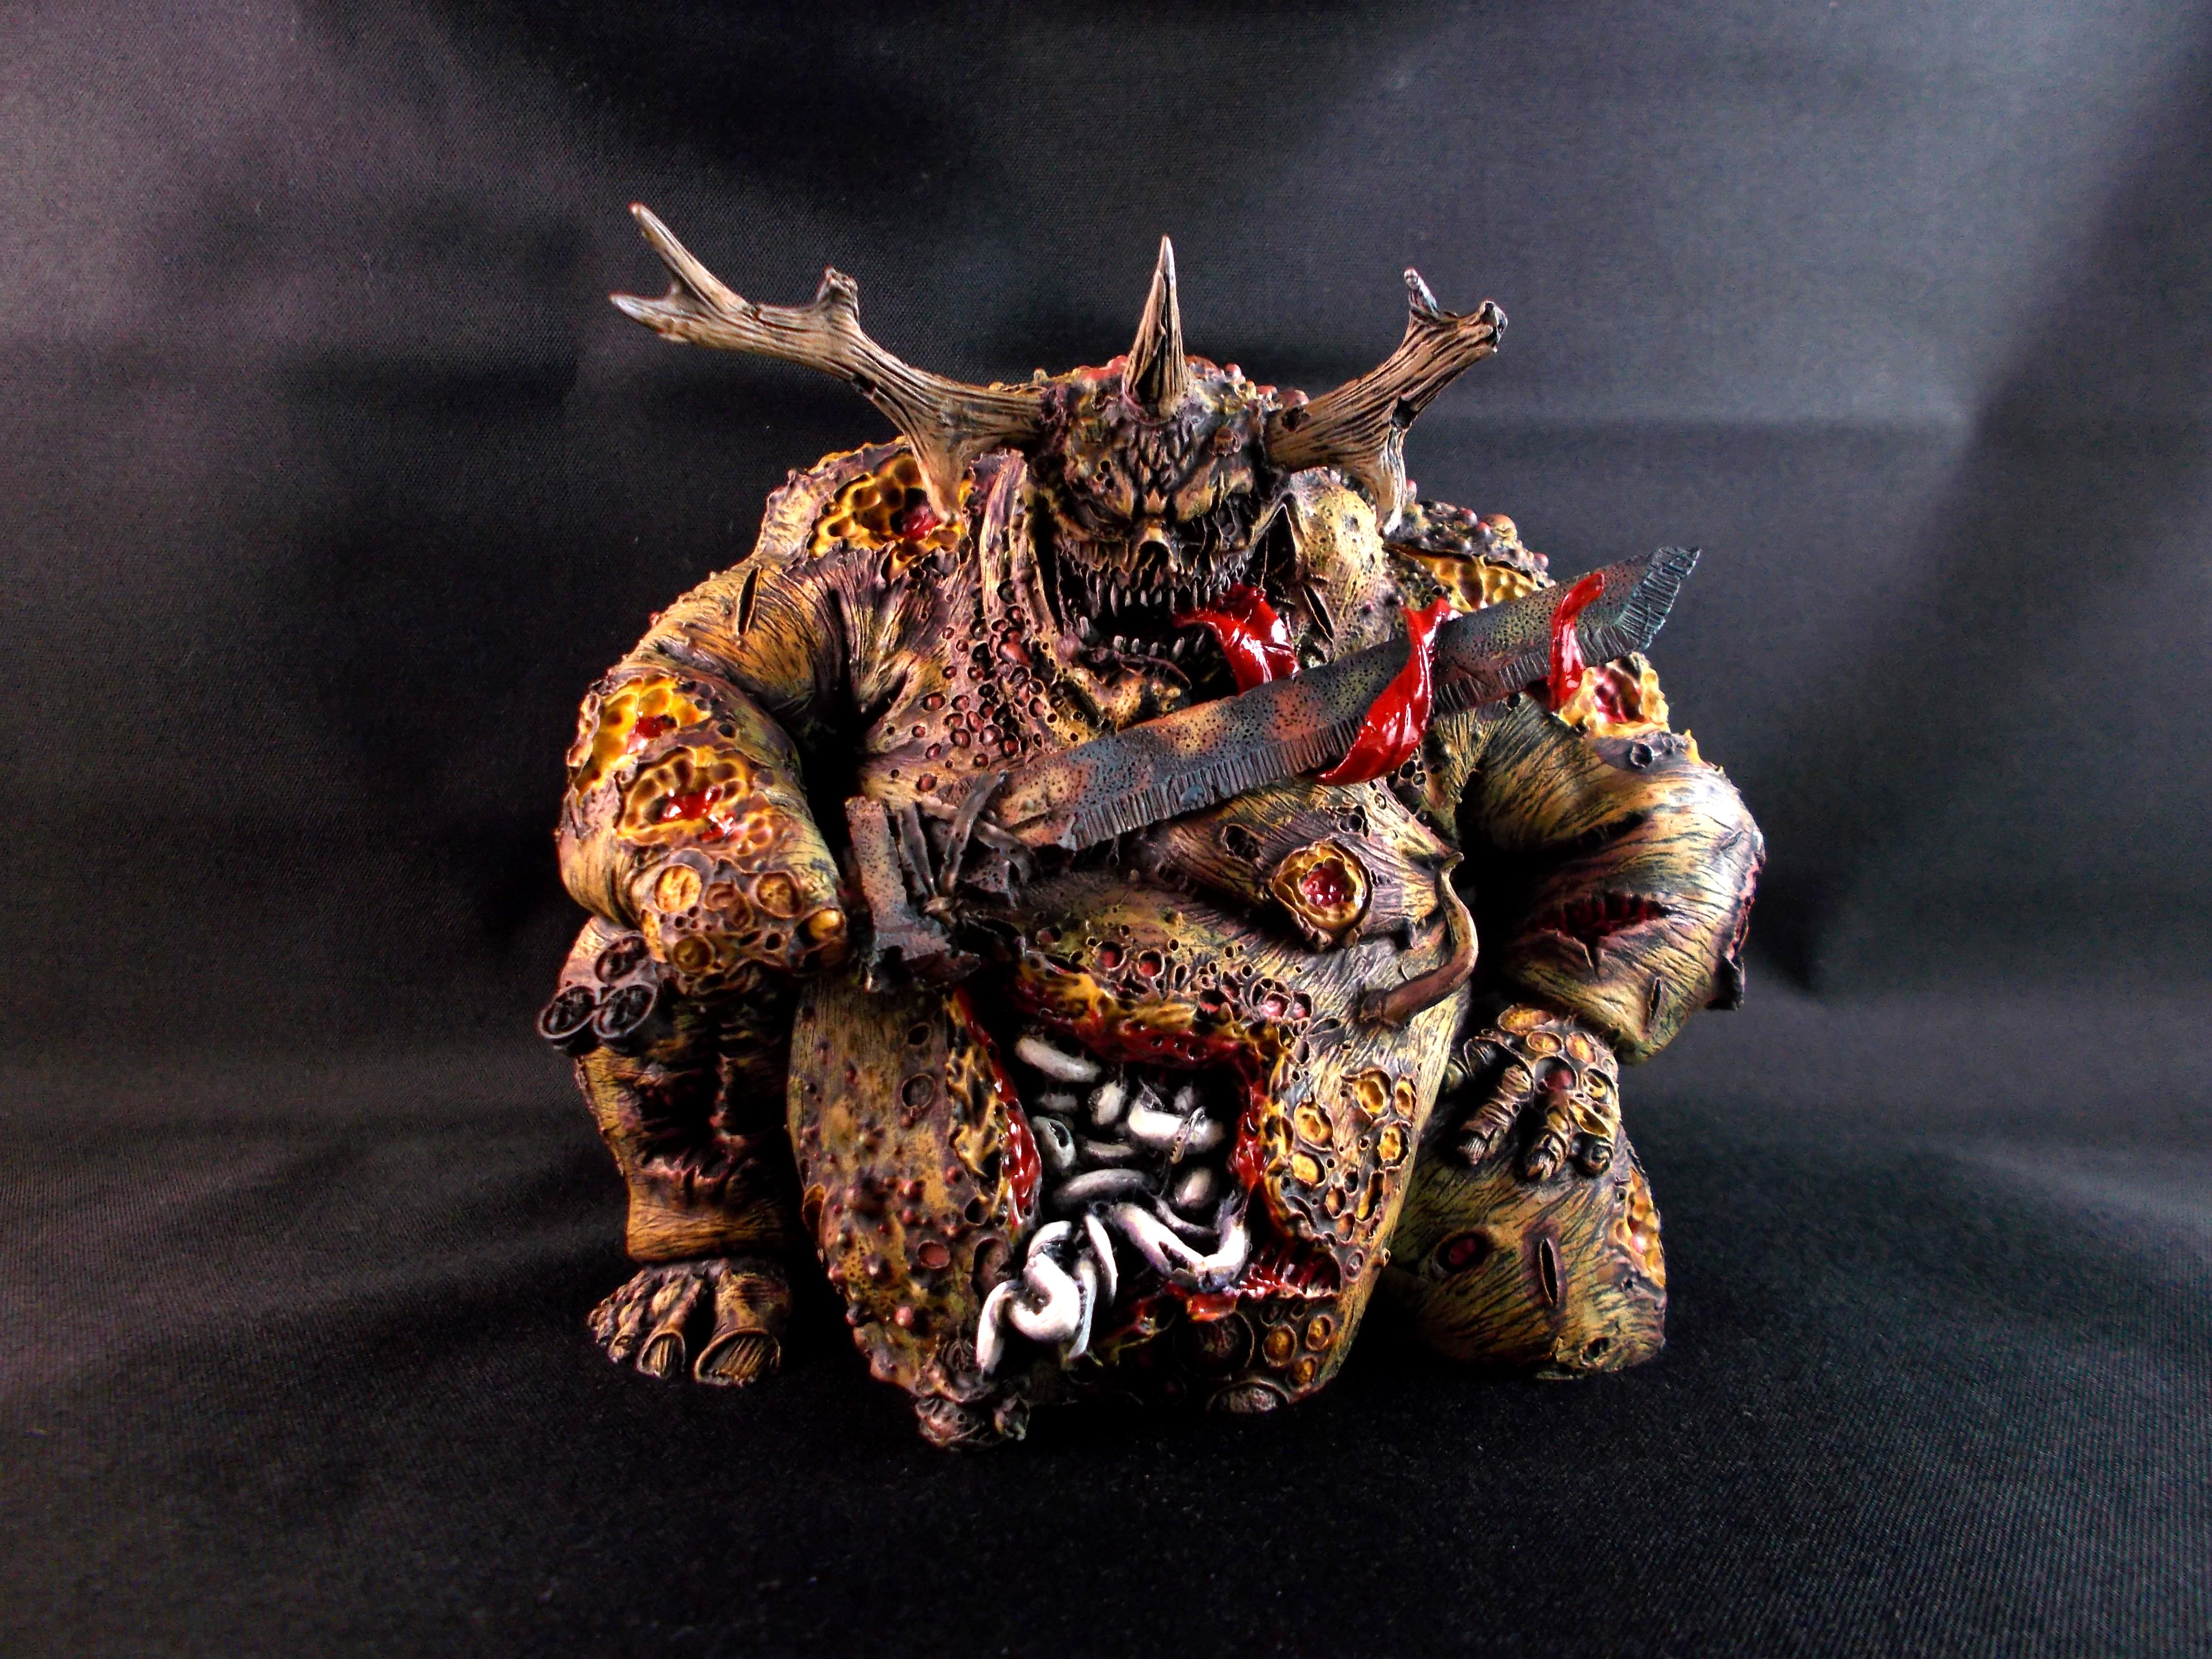 Great Unclean One, great unclean one